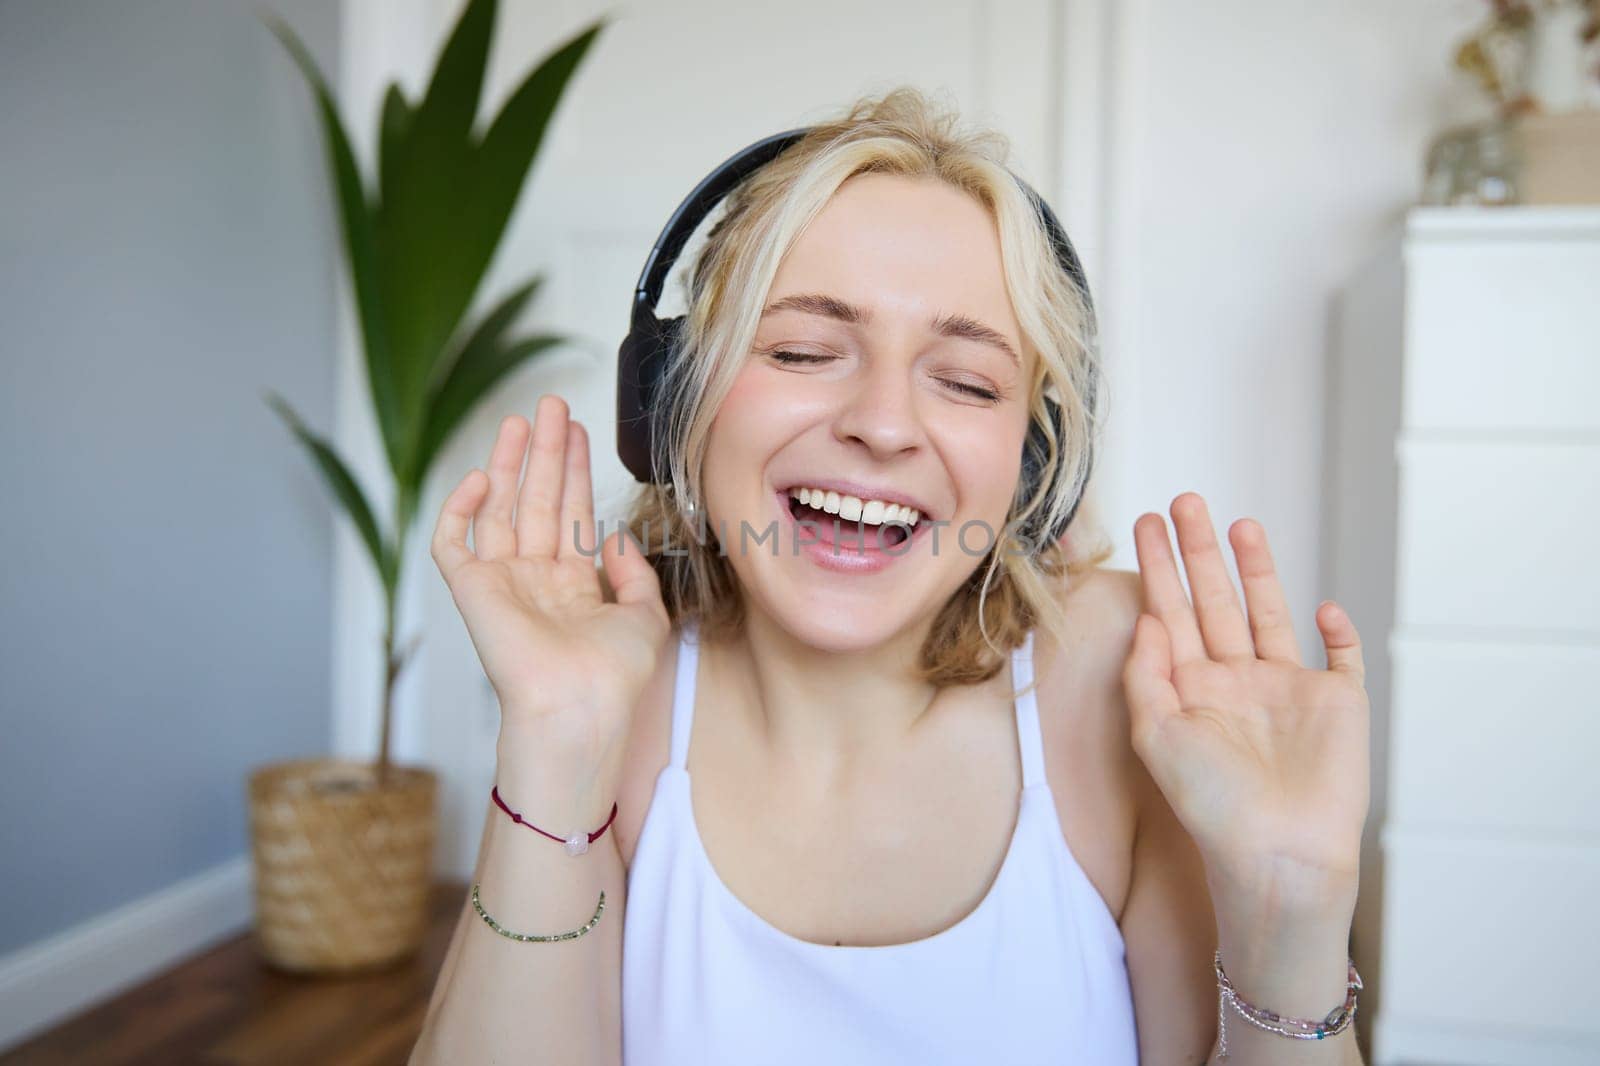 Close up portrait of candid, happy young woman in headphones, singing and listening to music at home.